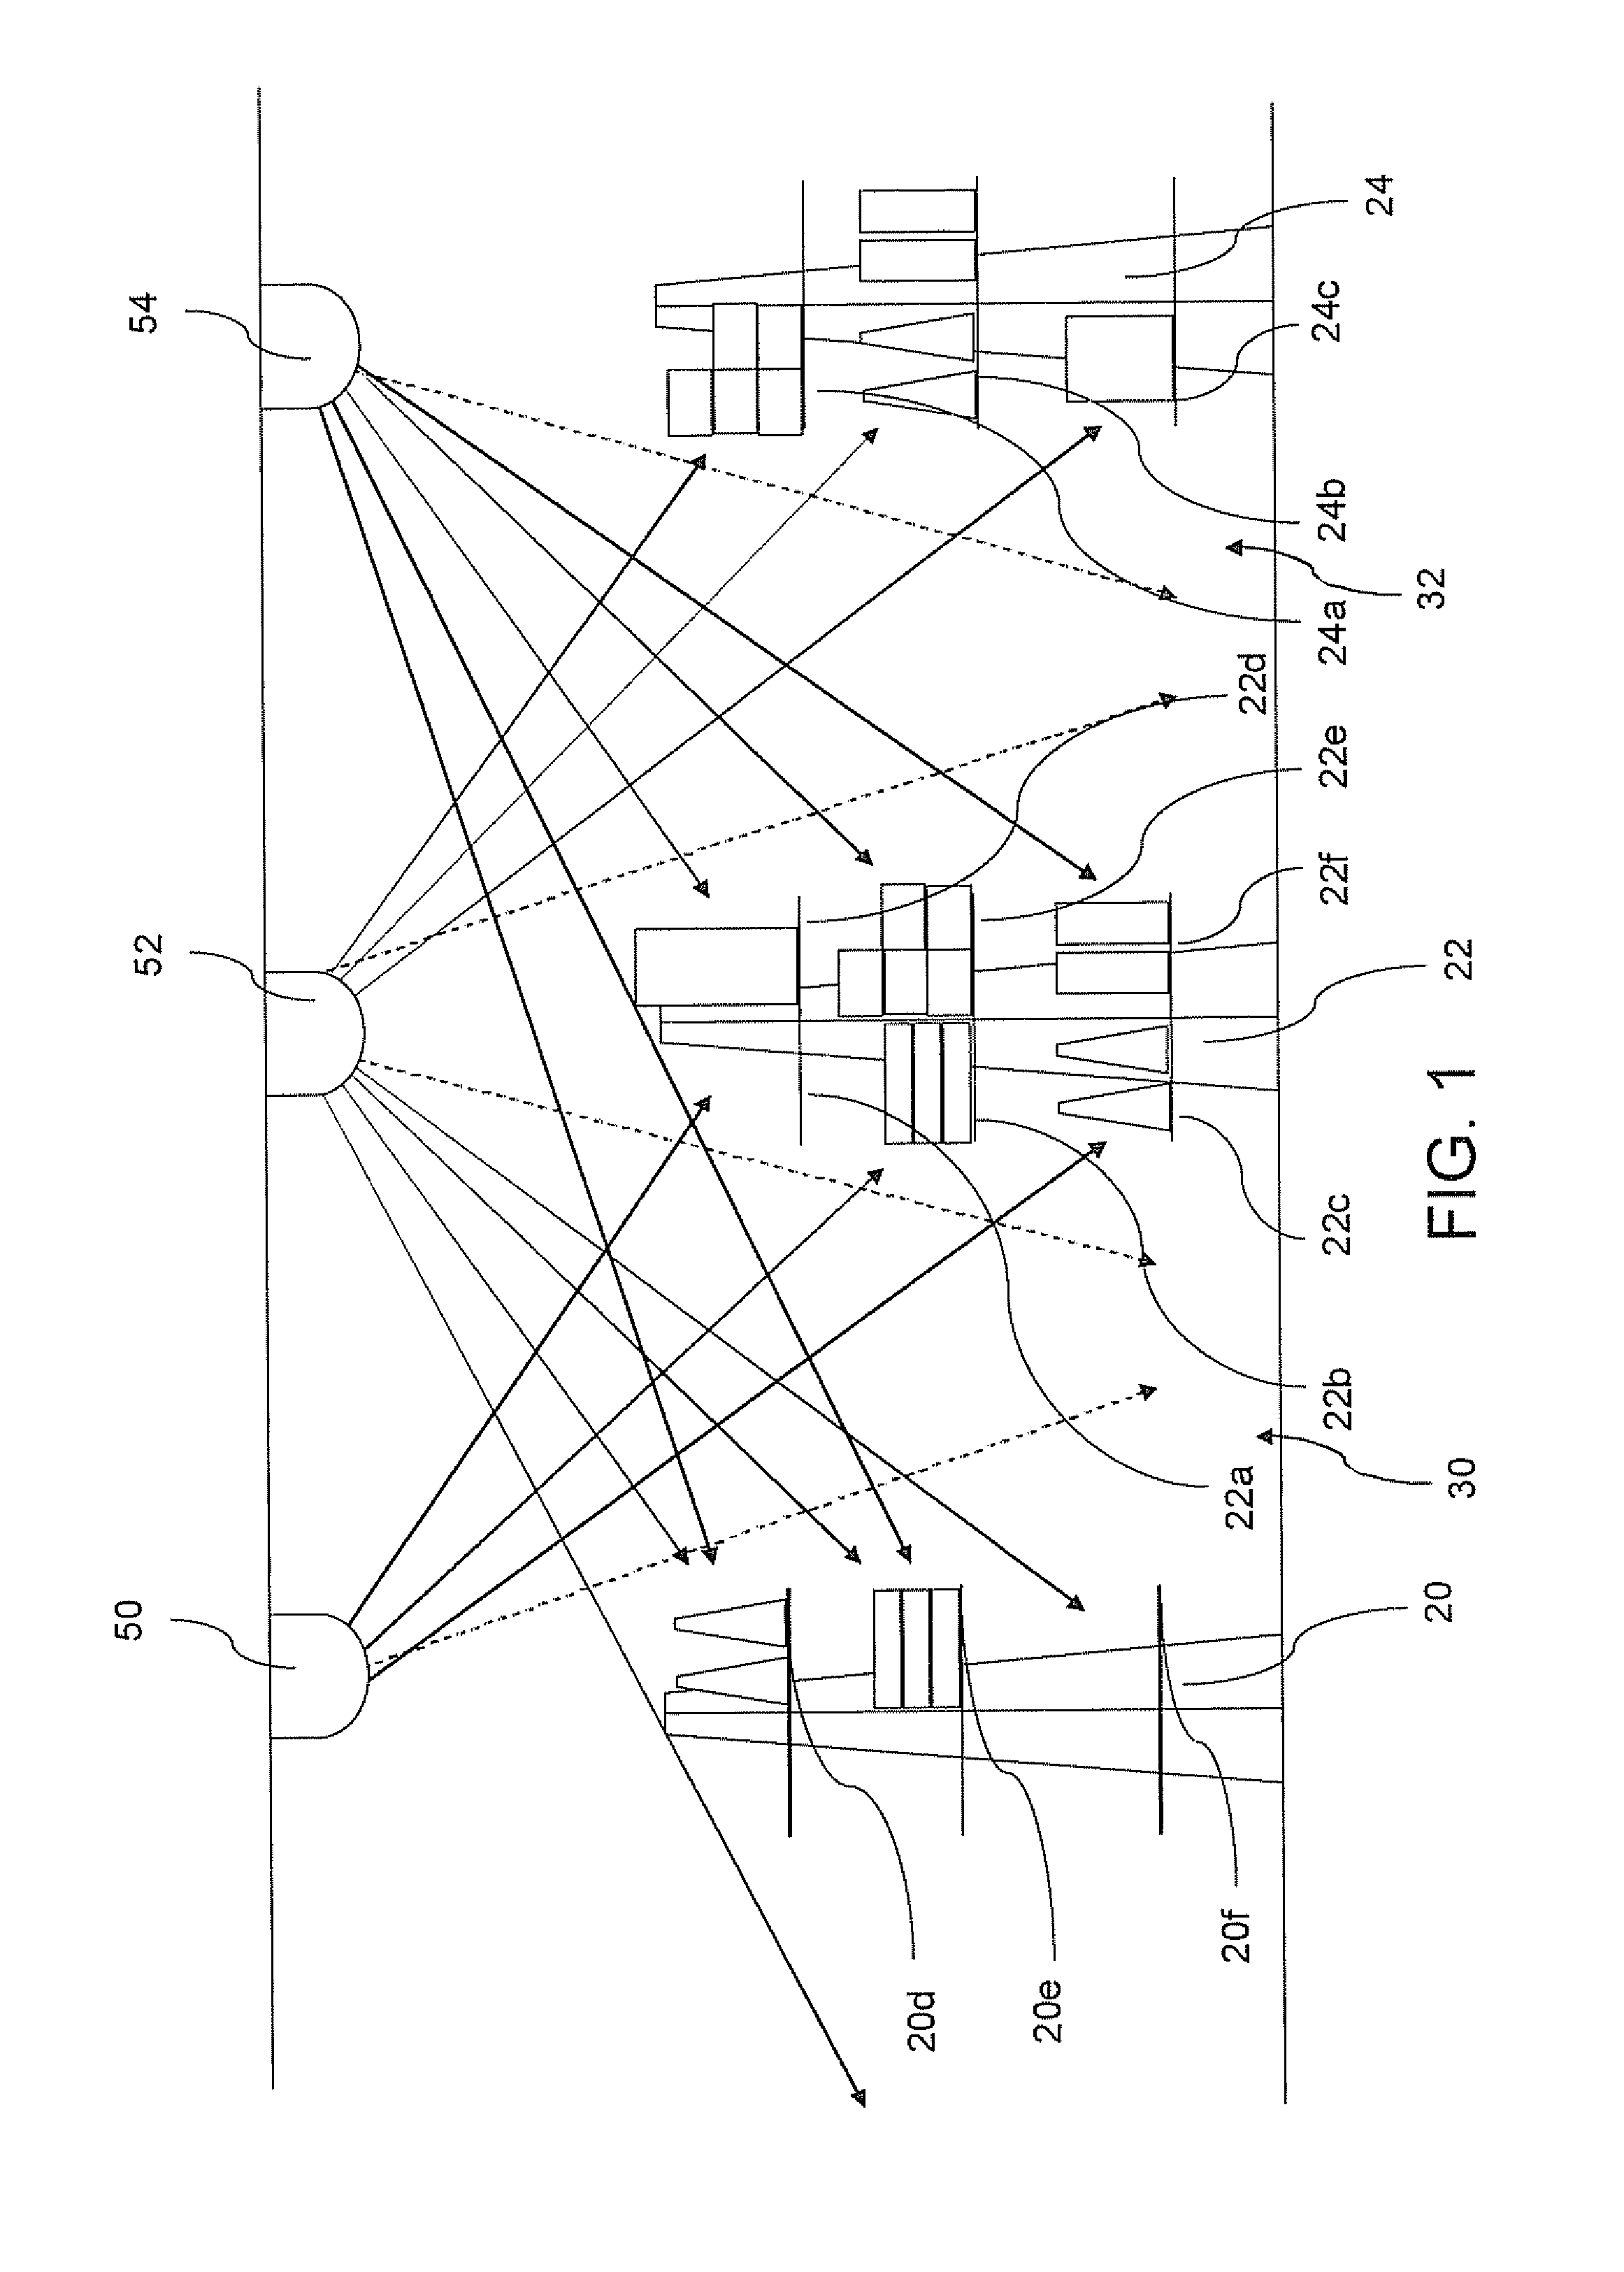 Method And System For Providing Security Surveillance And Shelf Monitoring Functions